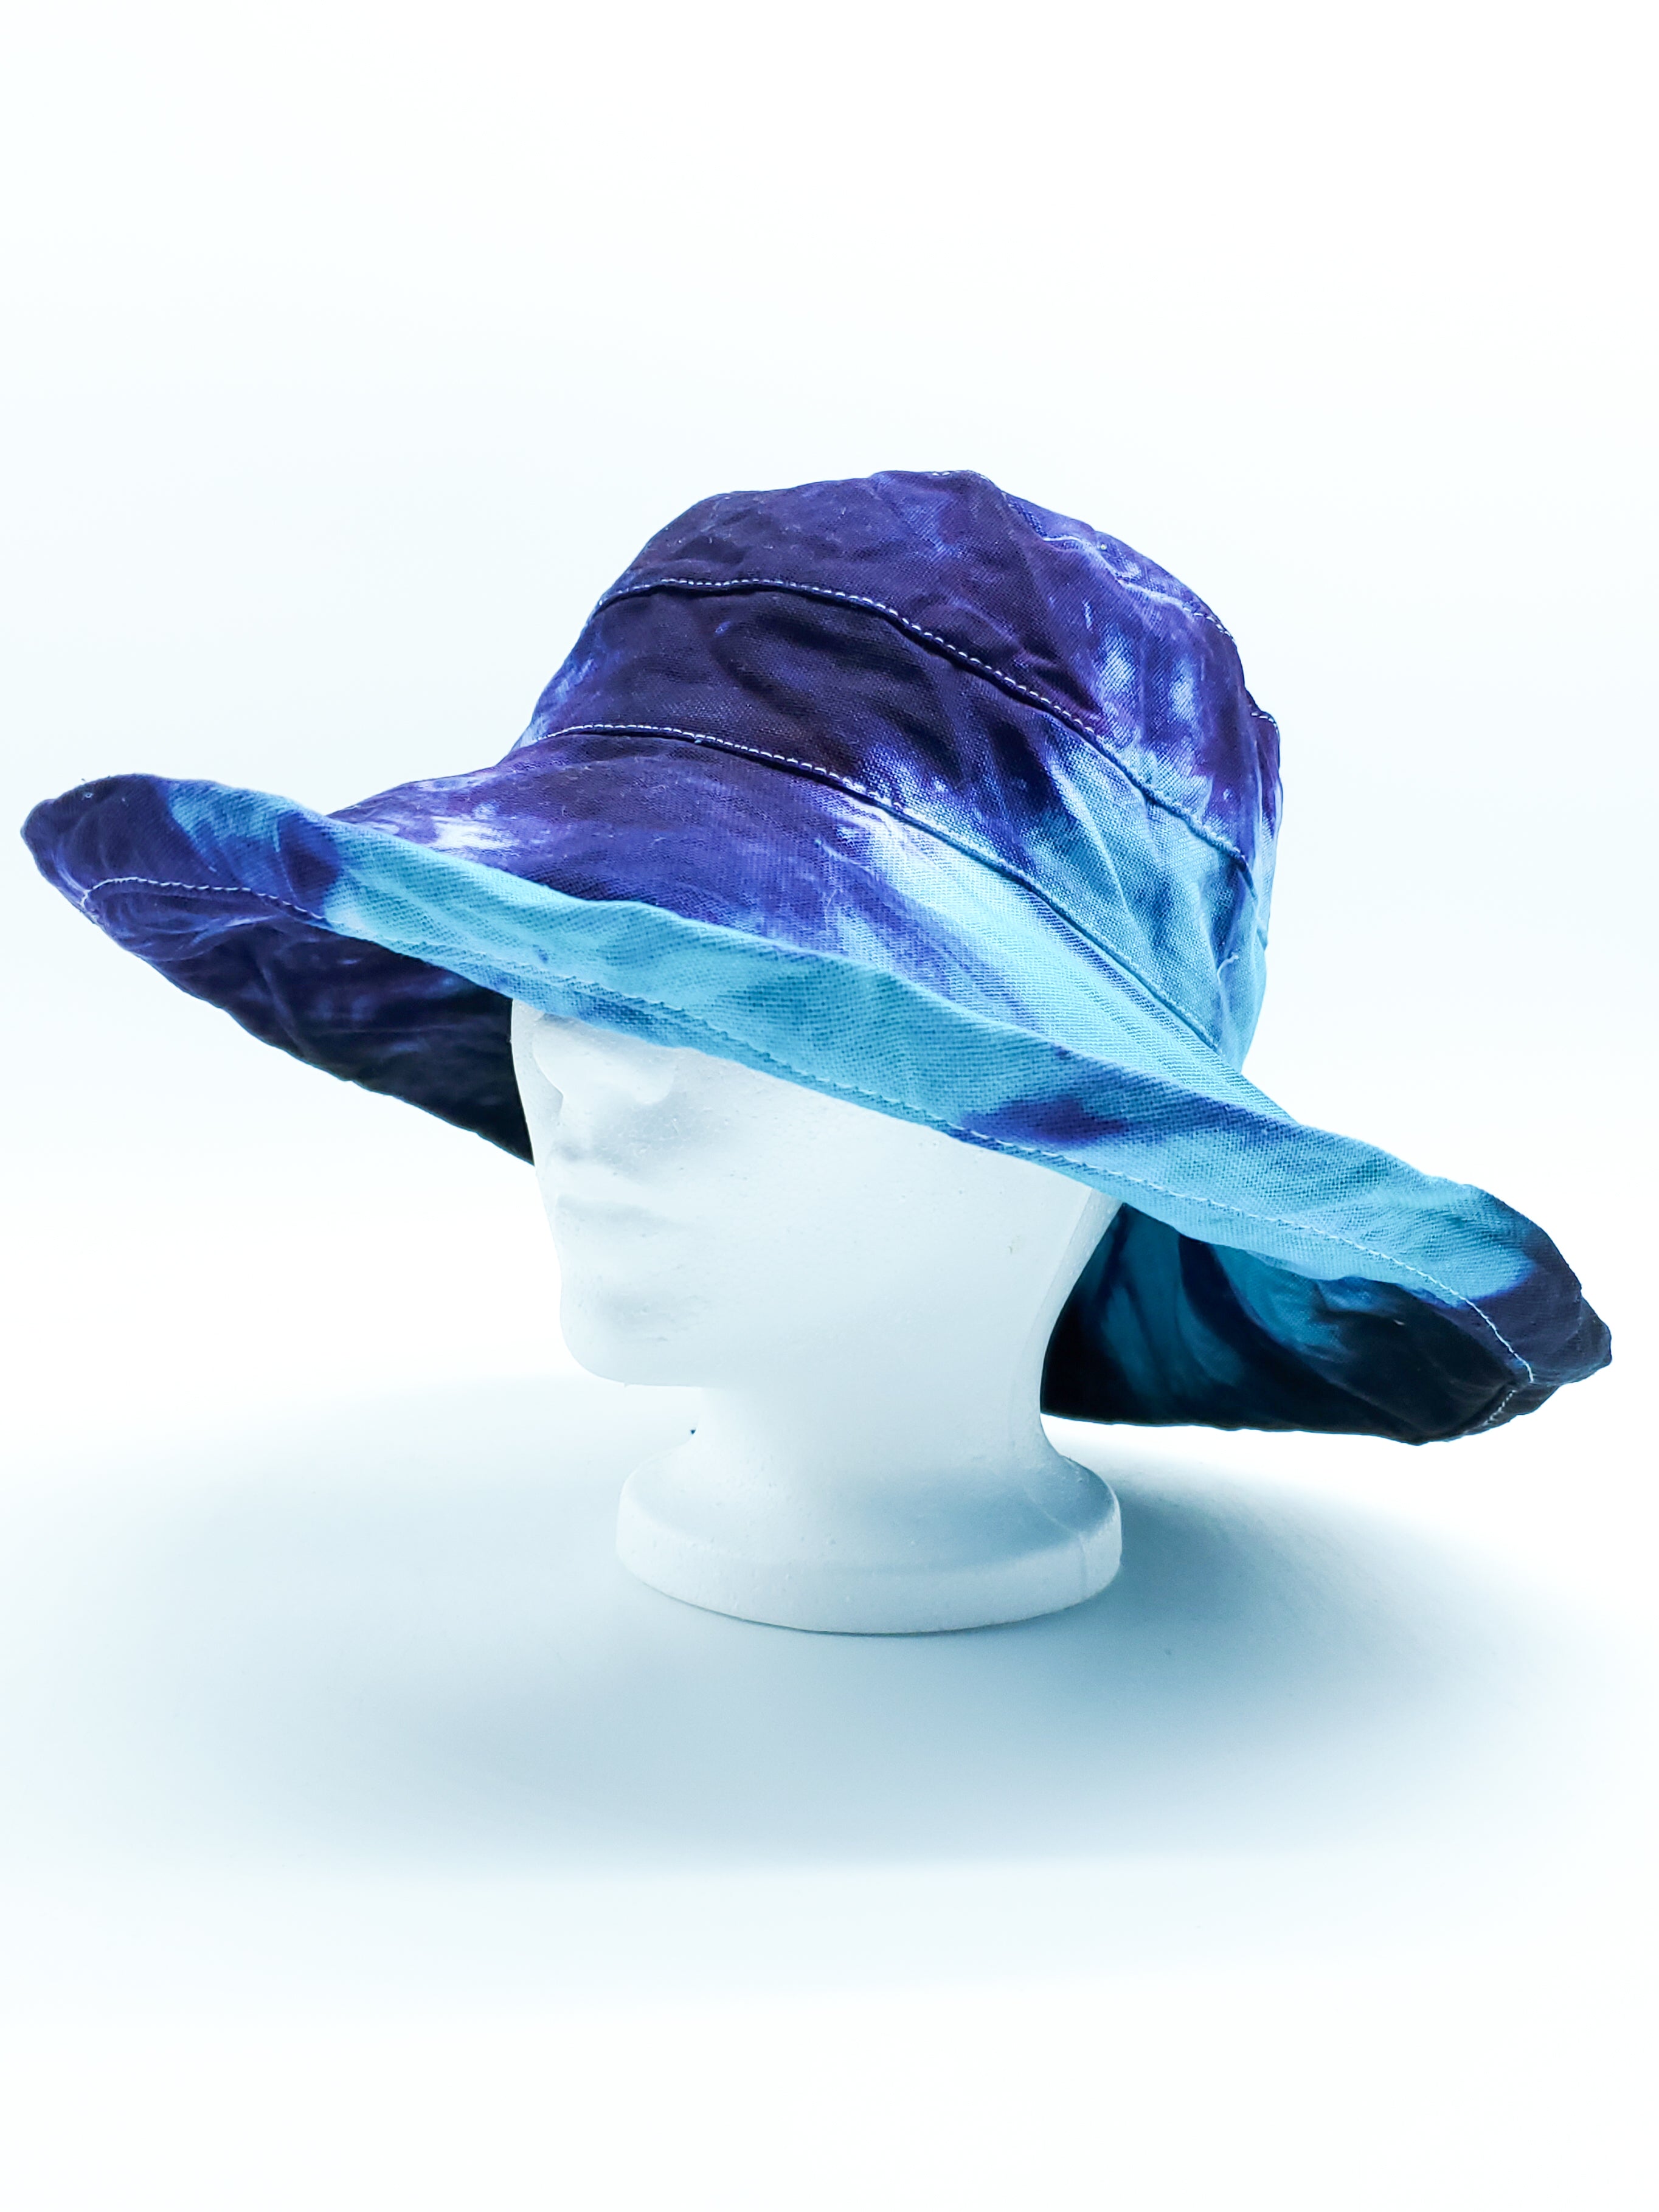 Adjustable Extra Wide Brim Tie Dyed Hat with Lining (O/S) - The Caffeinated Raven